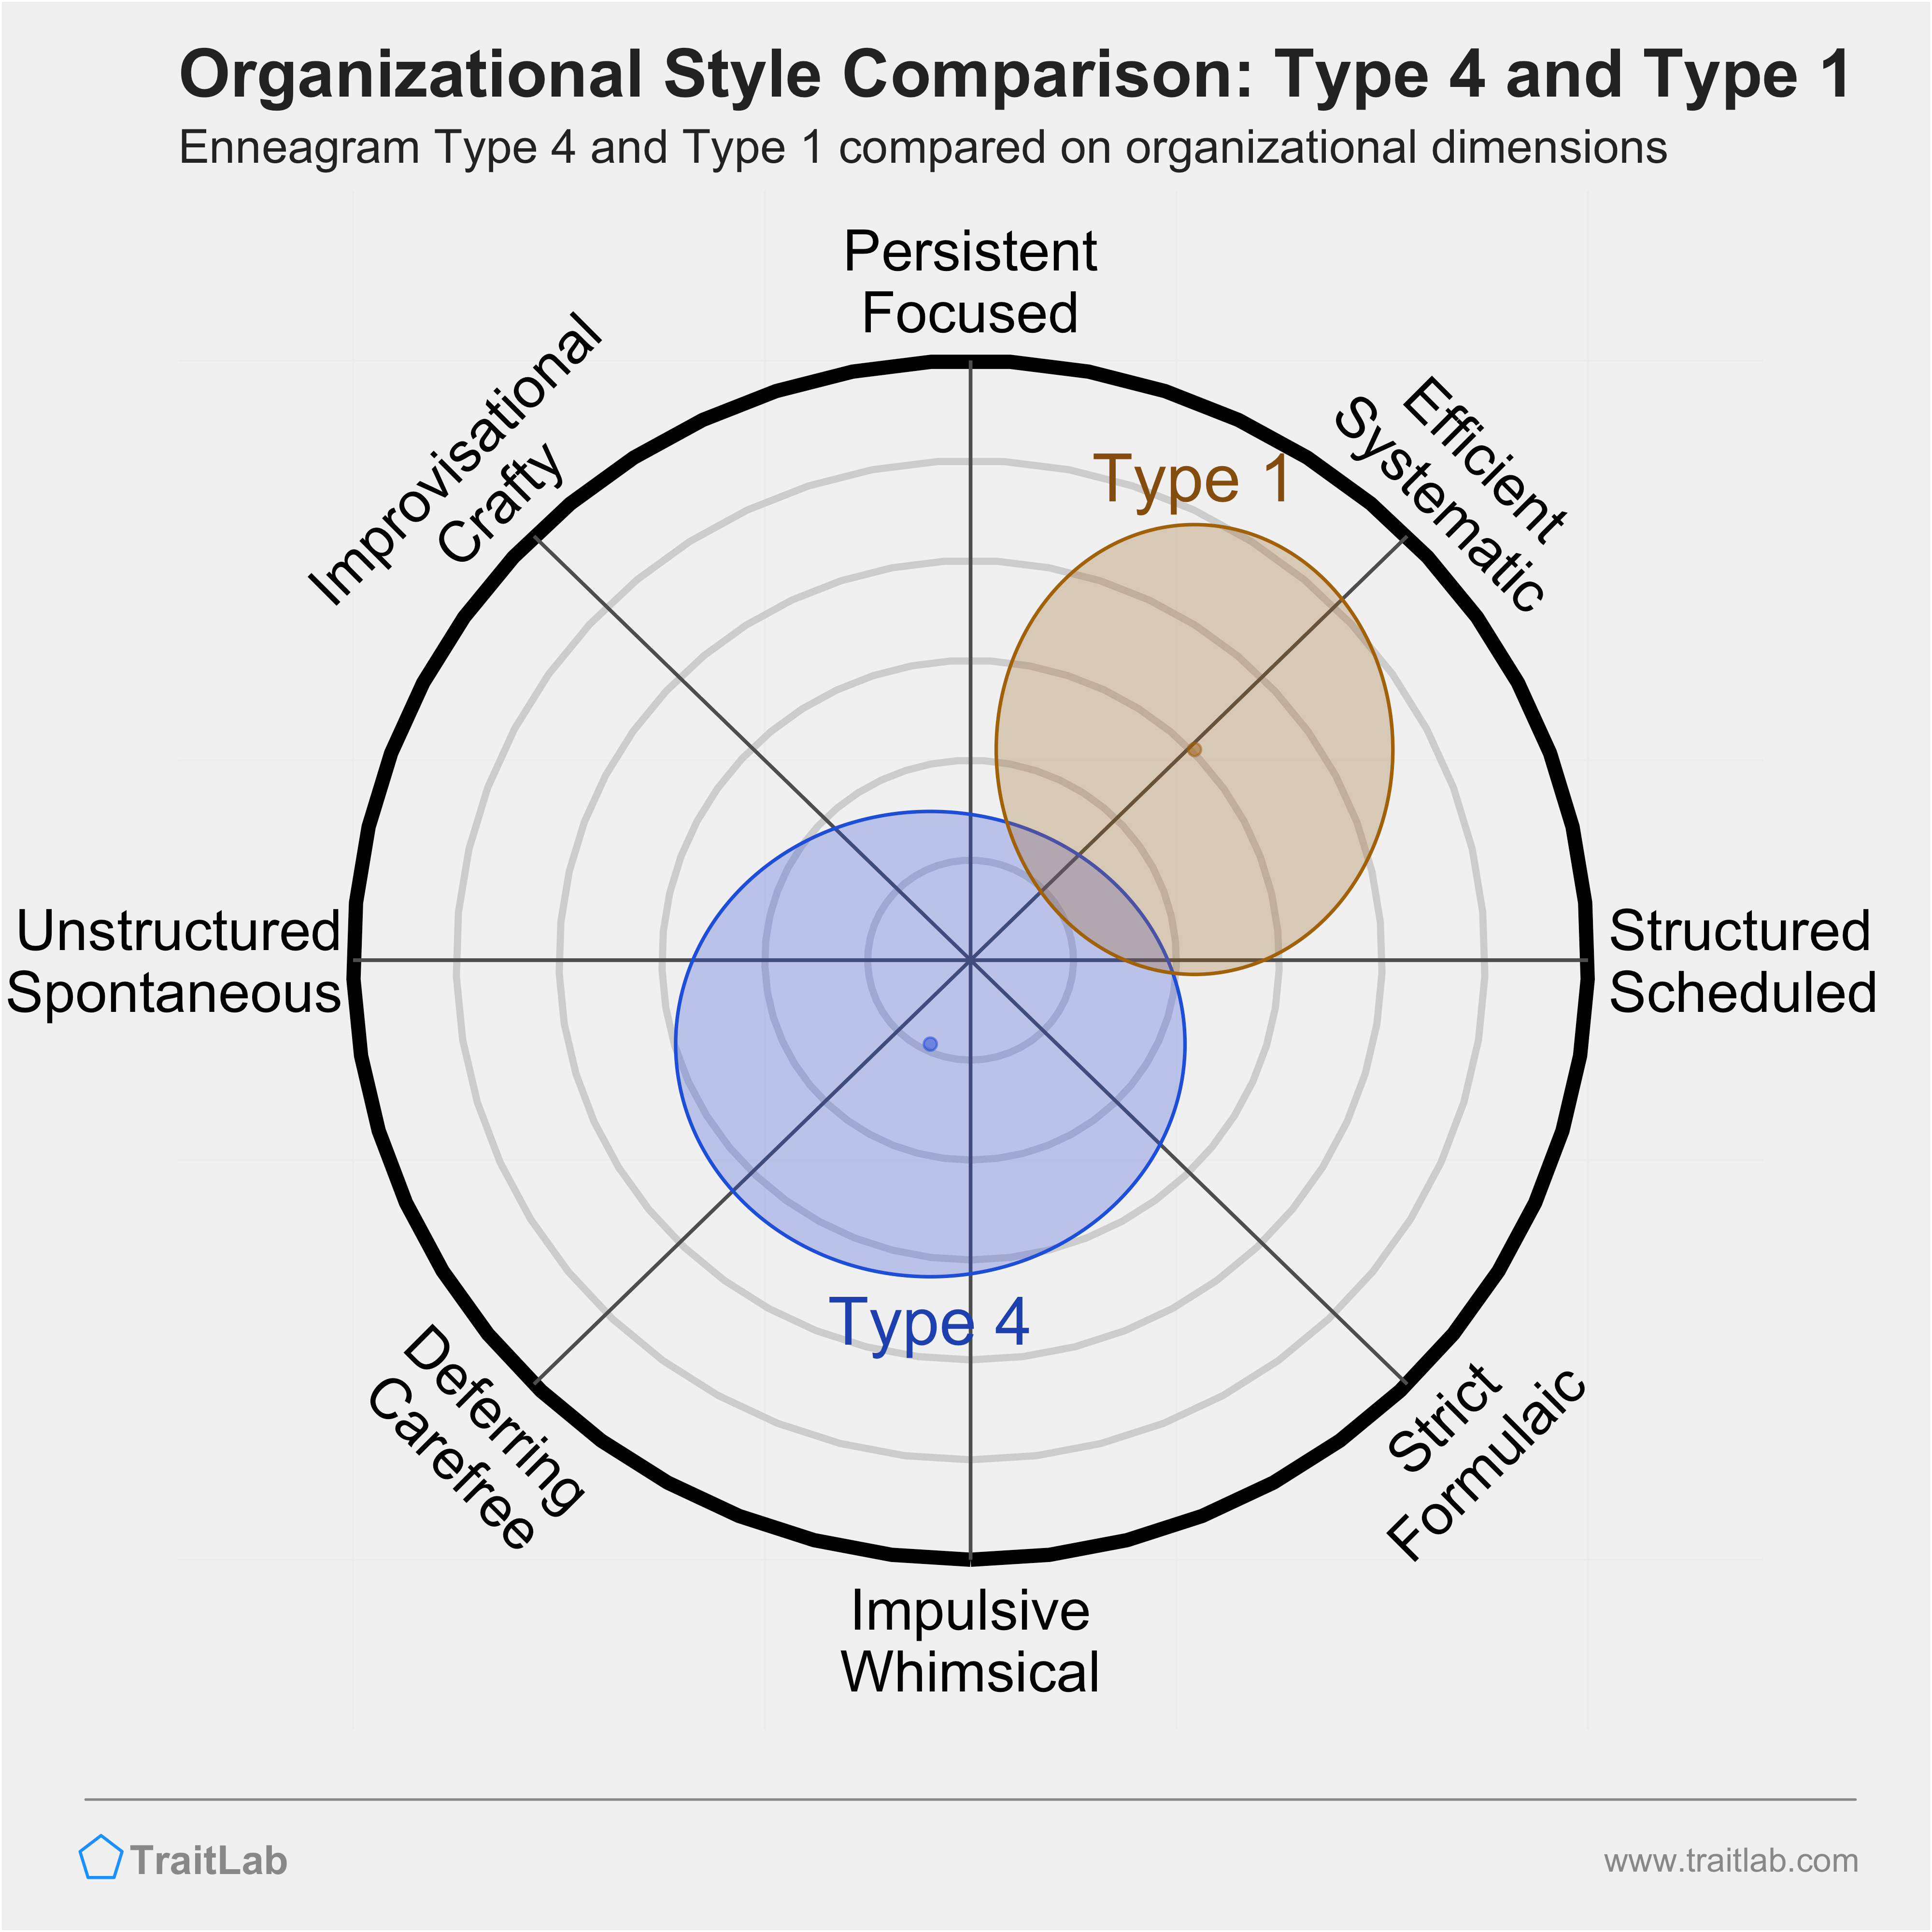 Type 4 and Type 1 comparison across organizational dimensions